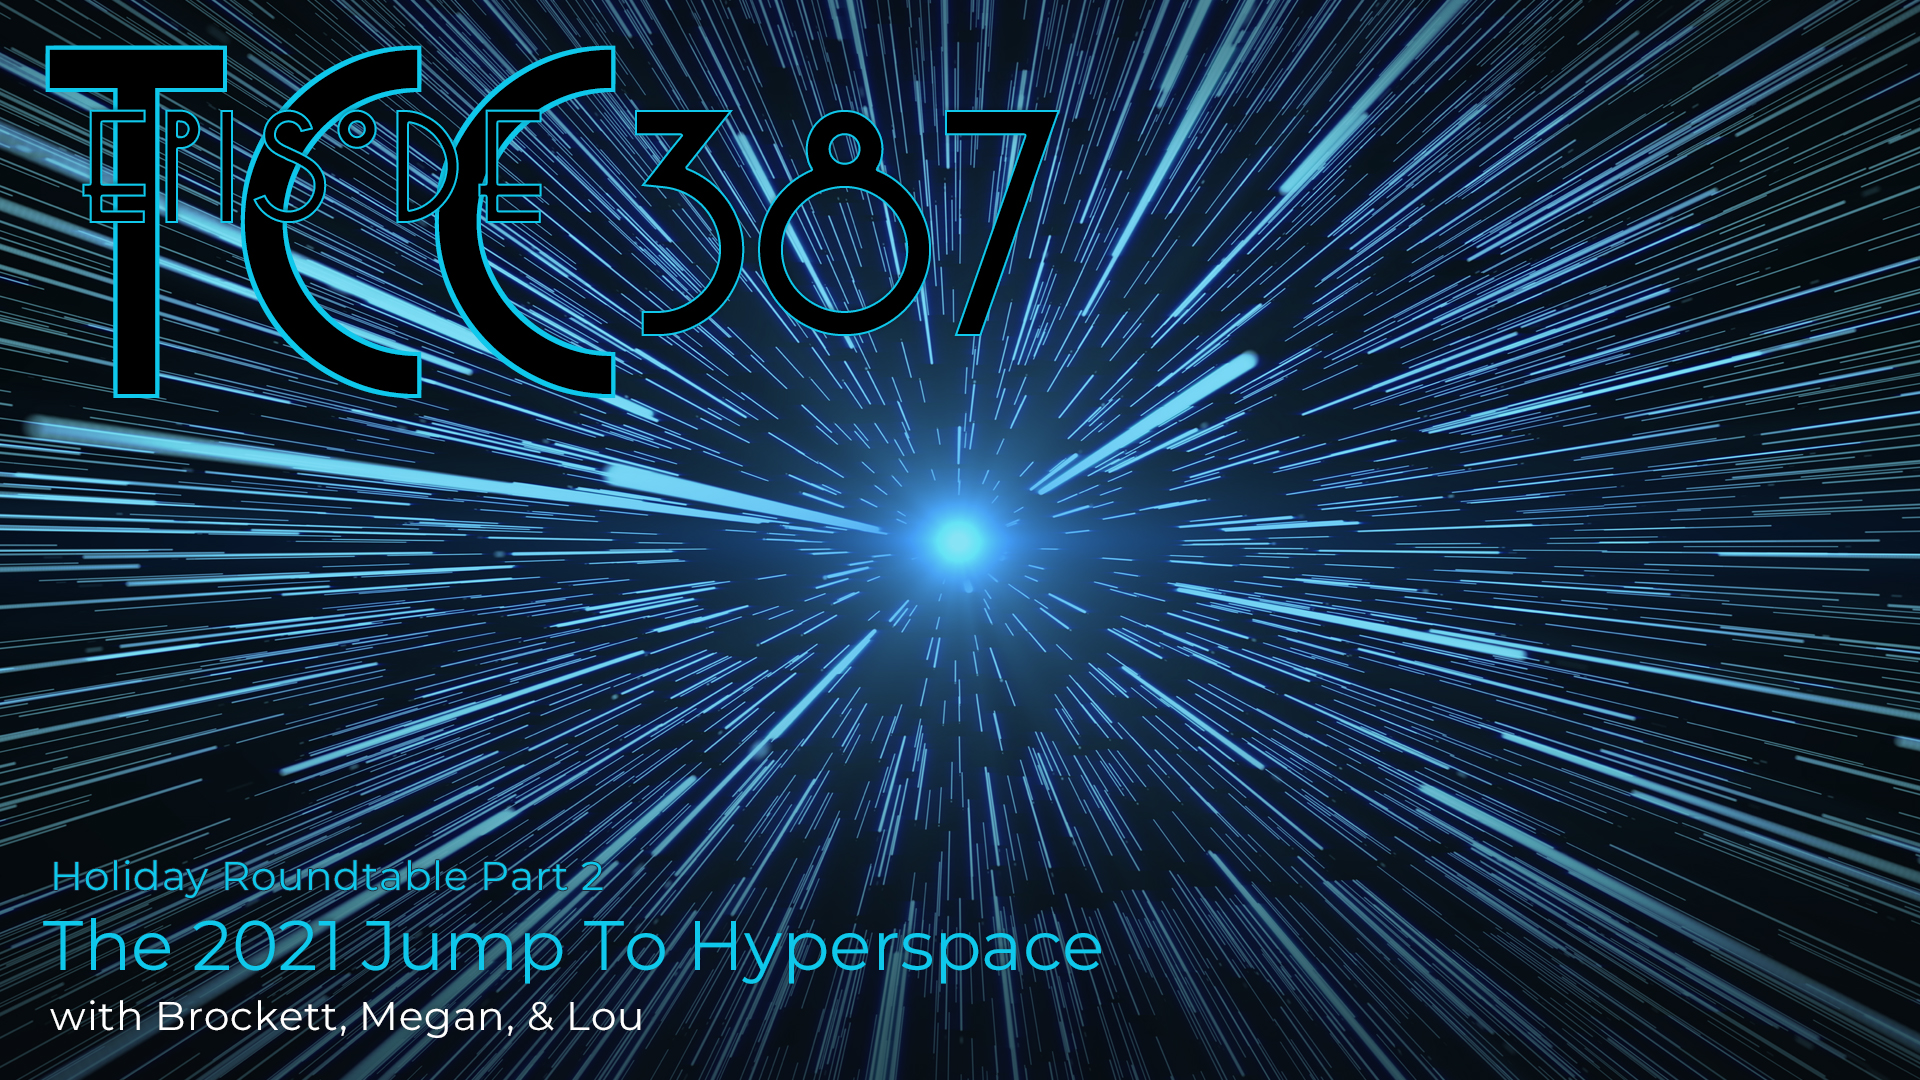 The Citadel Cafe 387: Hyperspace Jump To 2021